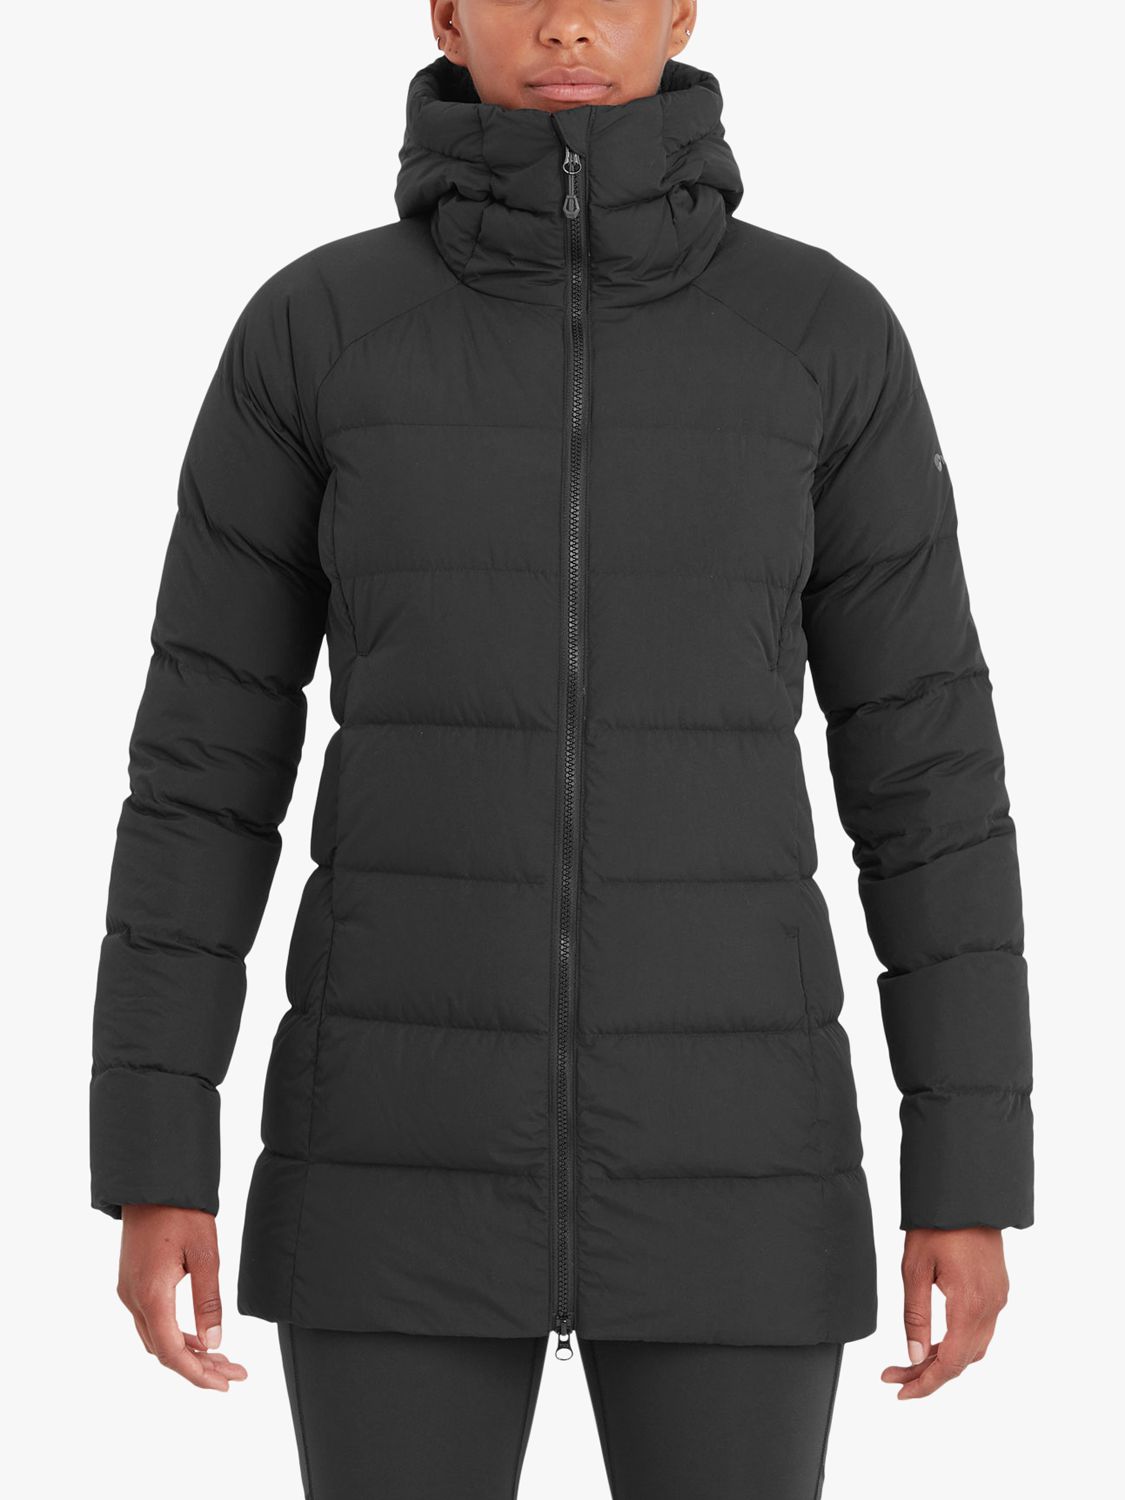 Montane Tundra Women's Recycled Down Puffer Jacket, Black, 12